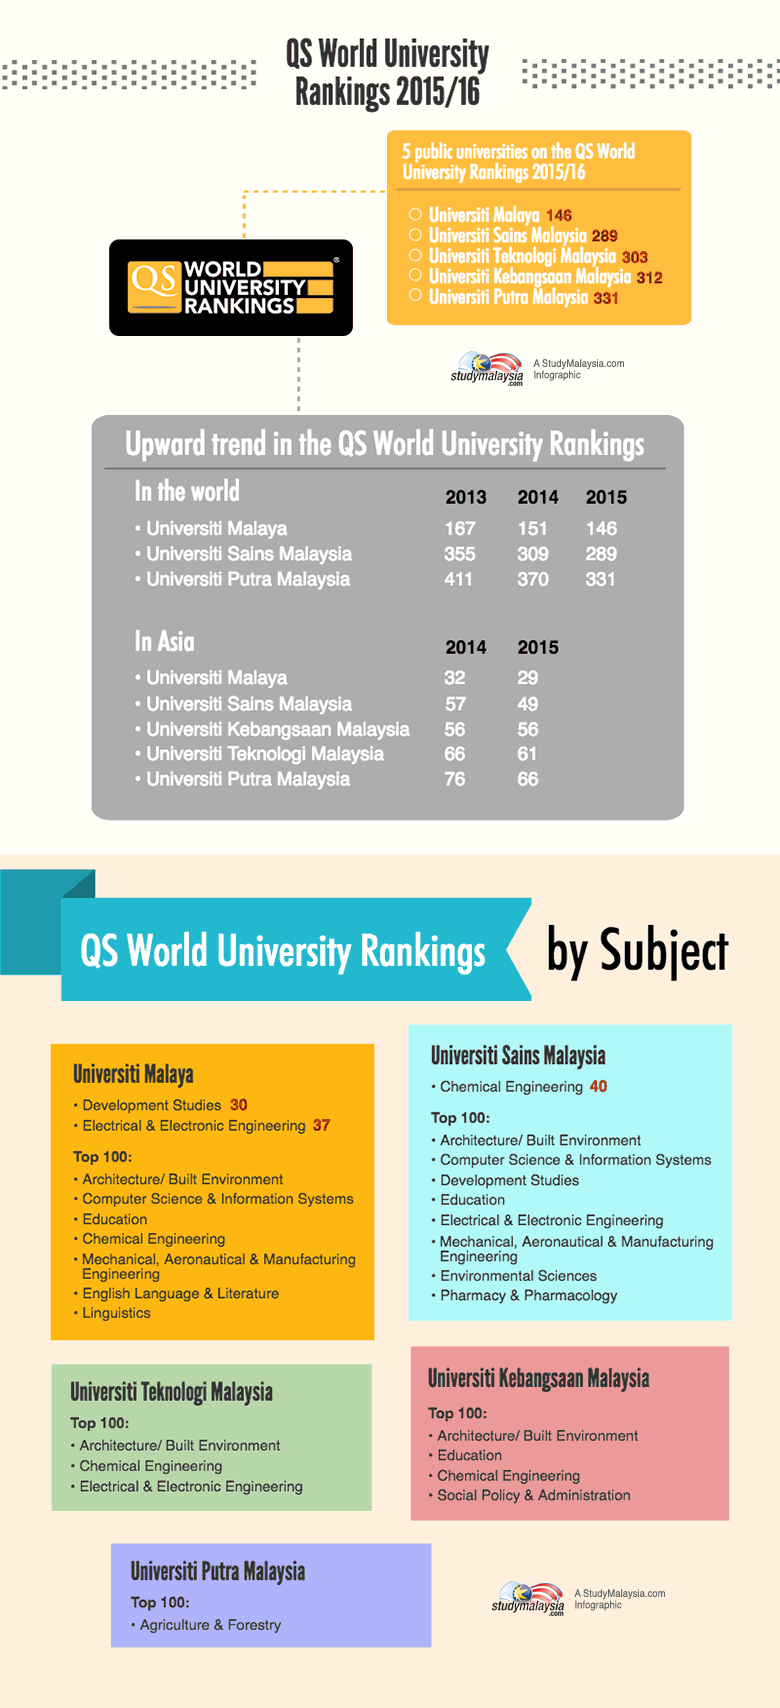 Soaring upwards – the achievements of higher education institutions in Malaysia